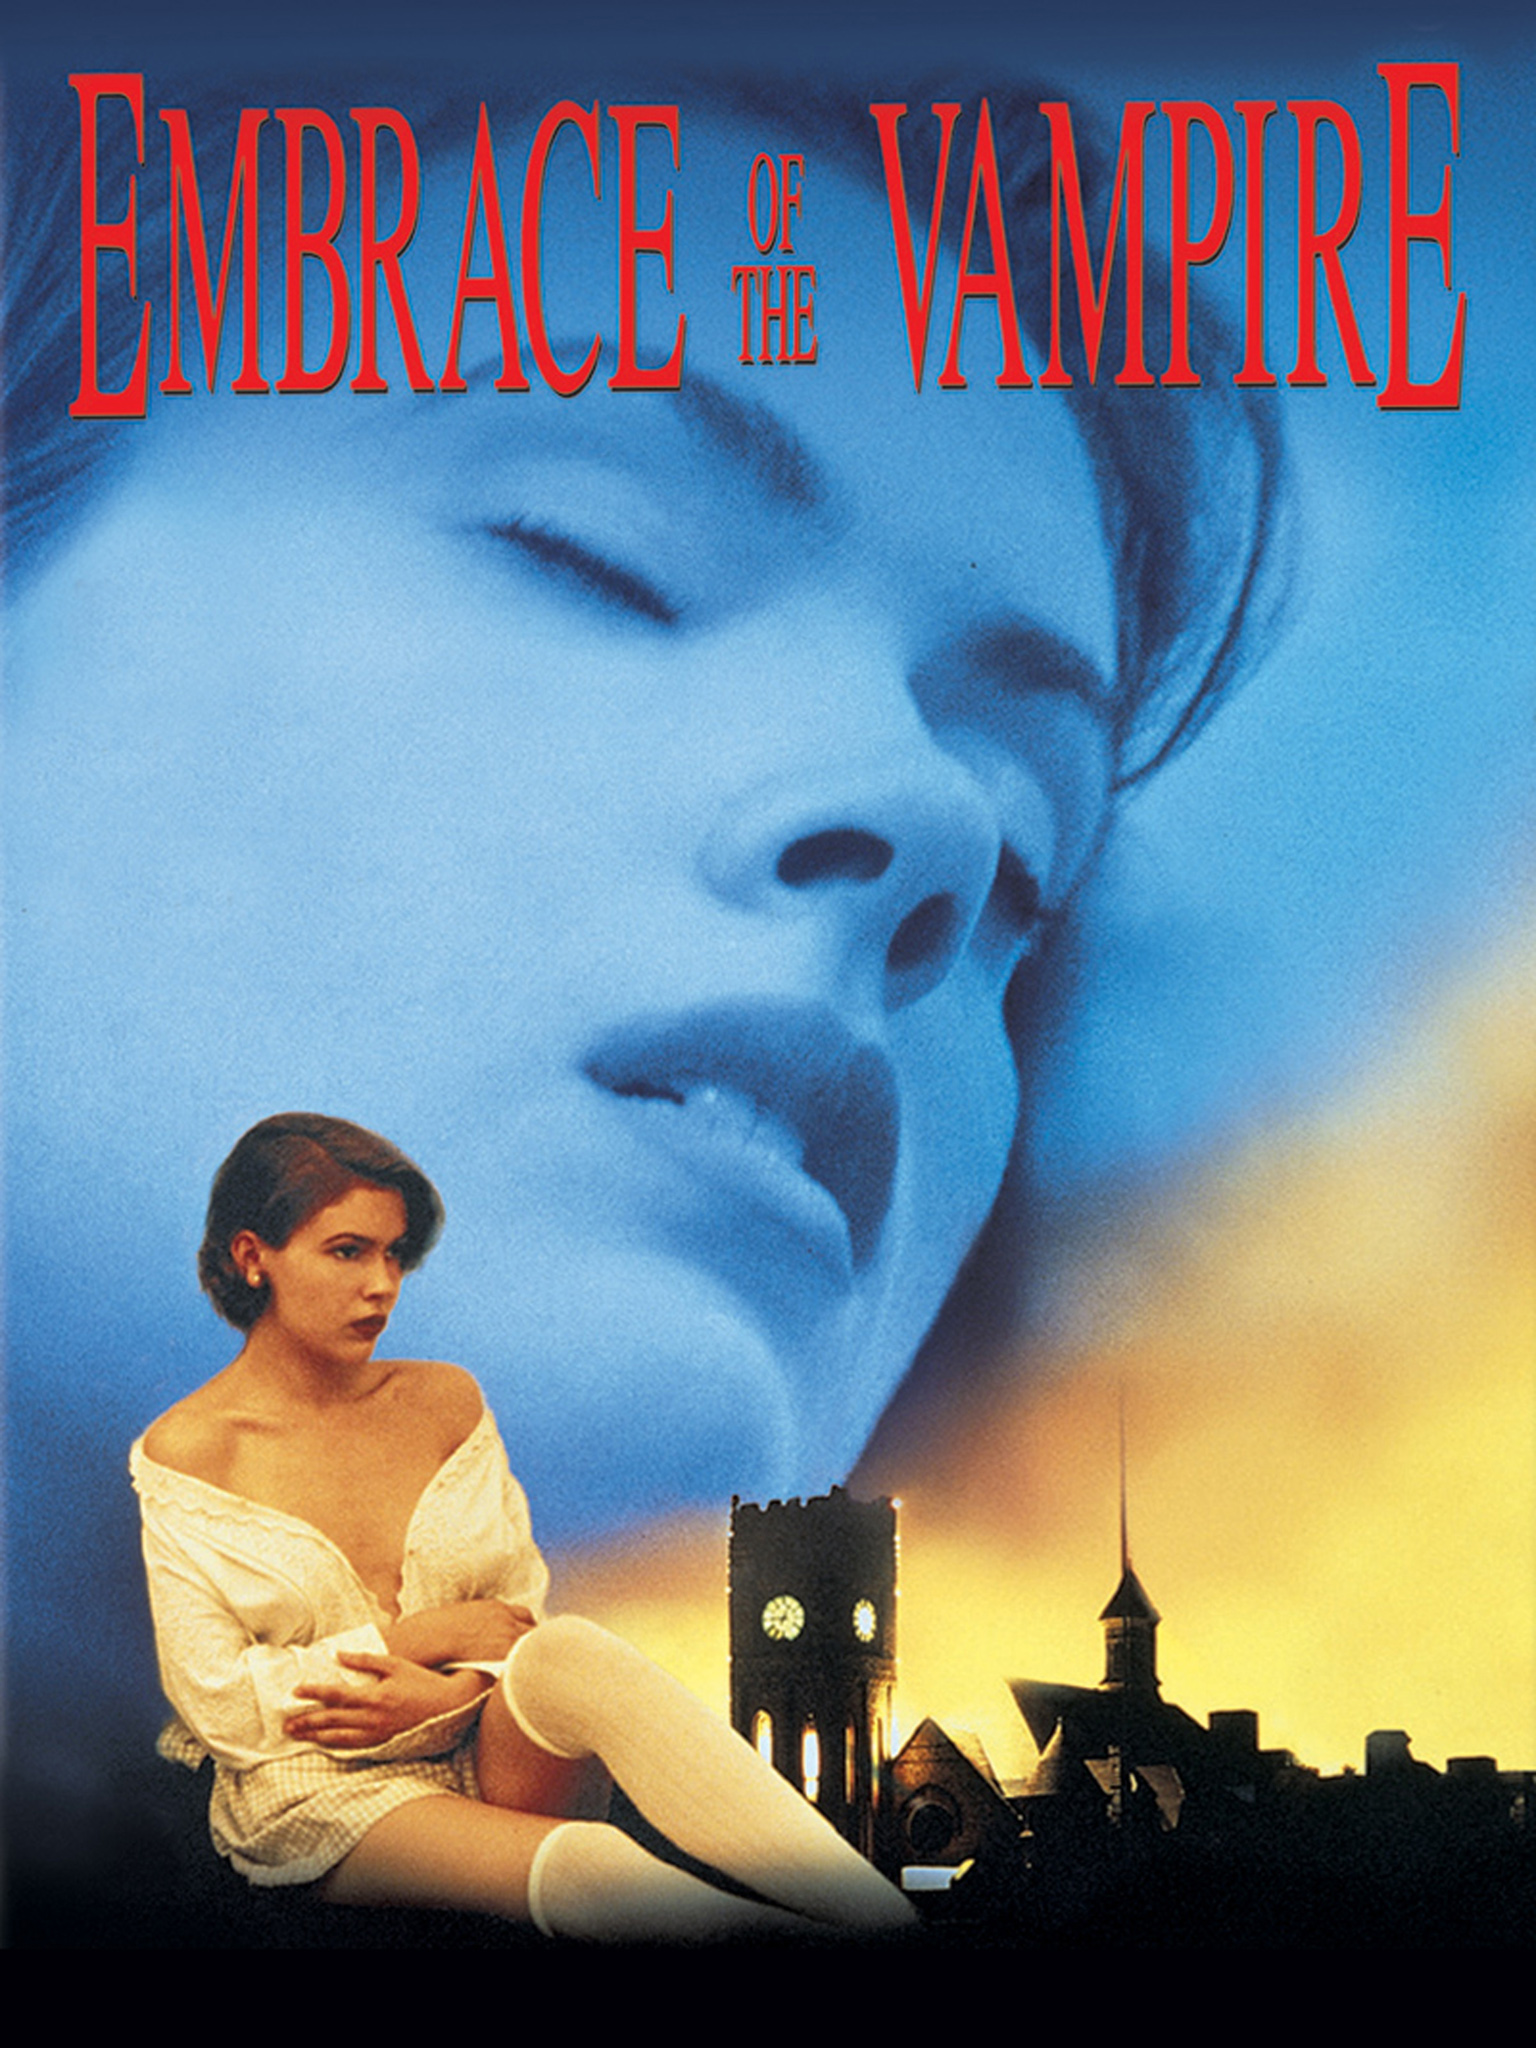 Watch Embrace Of The Vampire Online Free